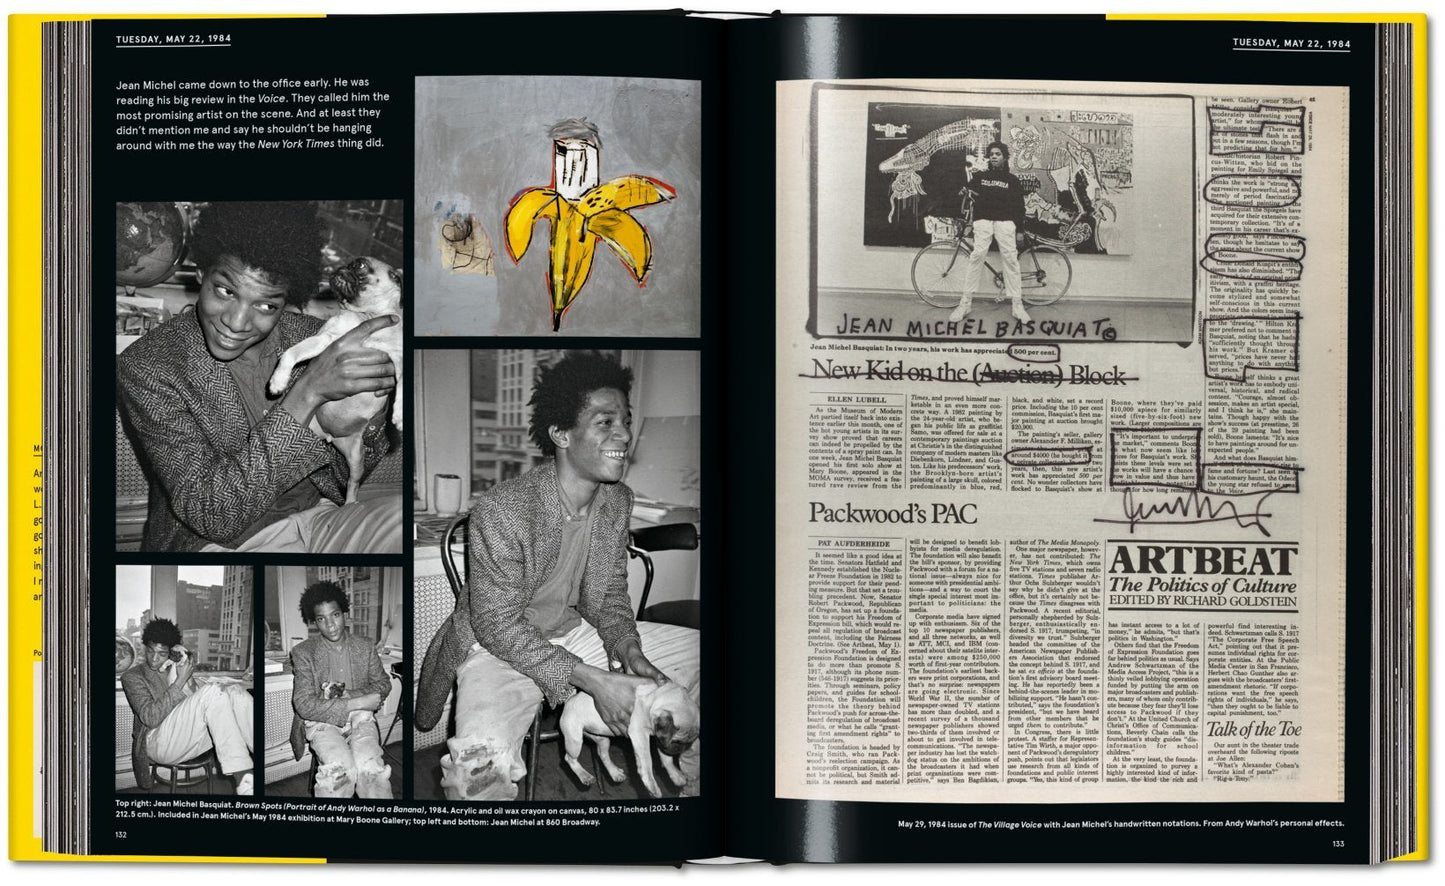 Warhol on Basquiat. Andy Warhol’s Words and Pictures DEIMOTIV